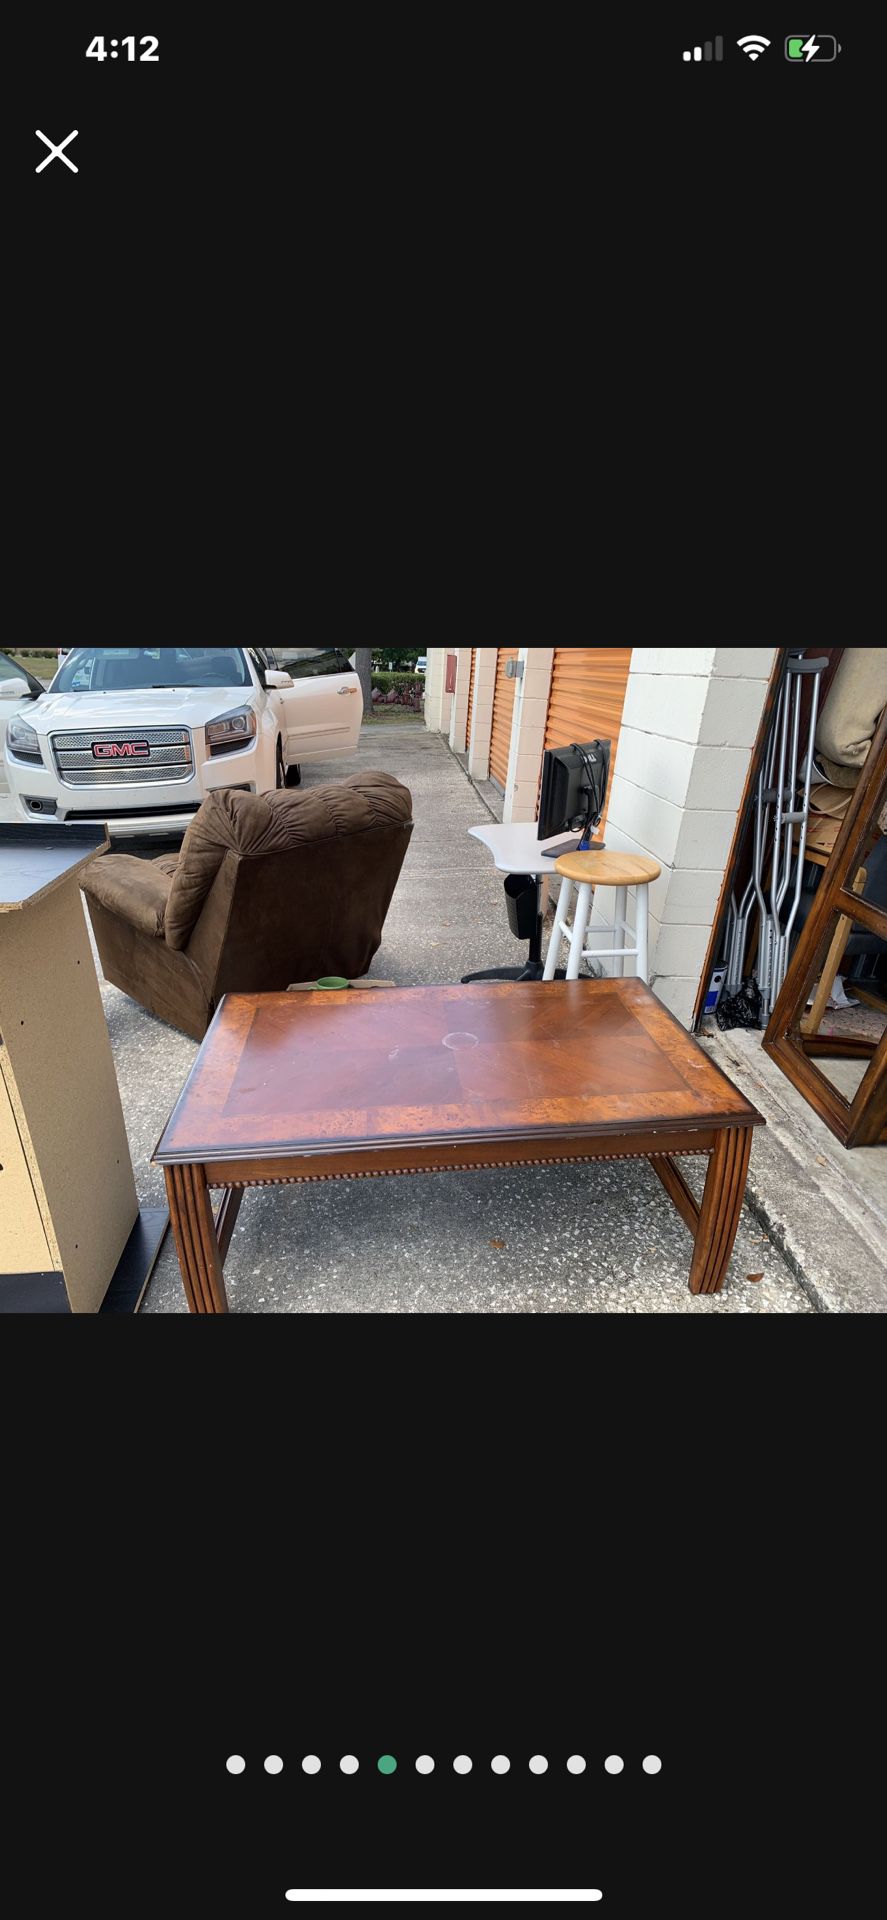 House Furniture From $5 🎈🎈🎈Up To $15 Pick What You Like, Furniture, House Items, Chair, Table, Lamp, Crutches, Organizer, Tv Stand, Pictures, Desk.